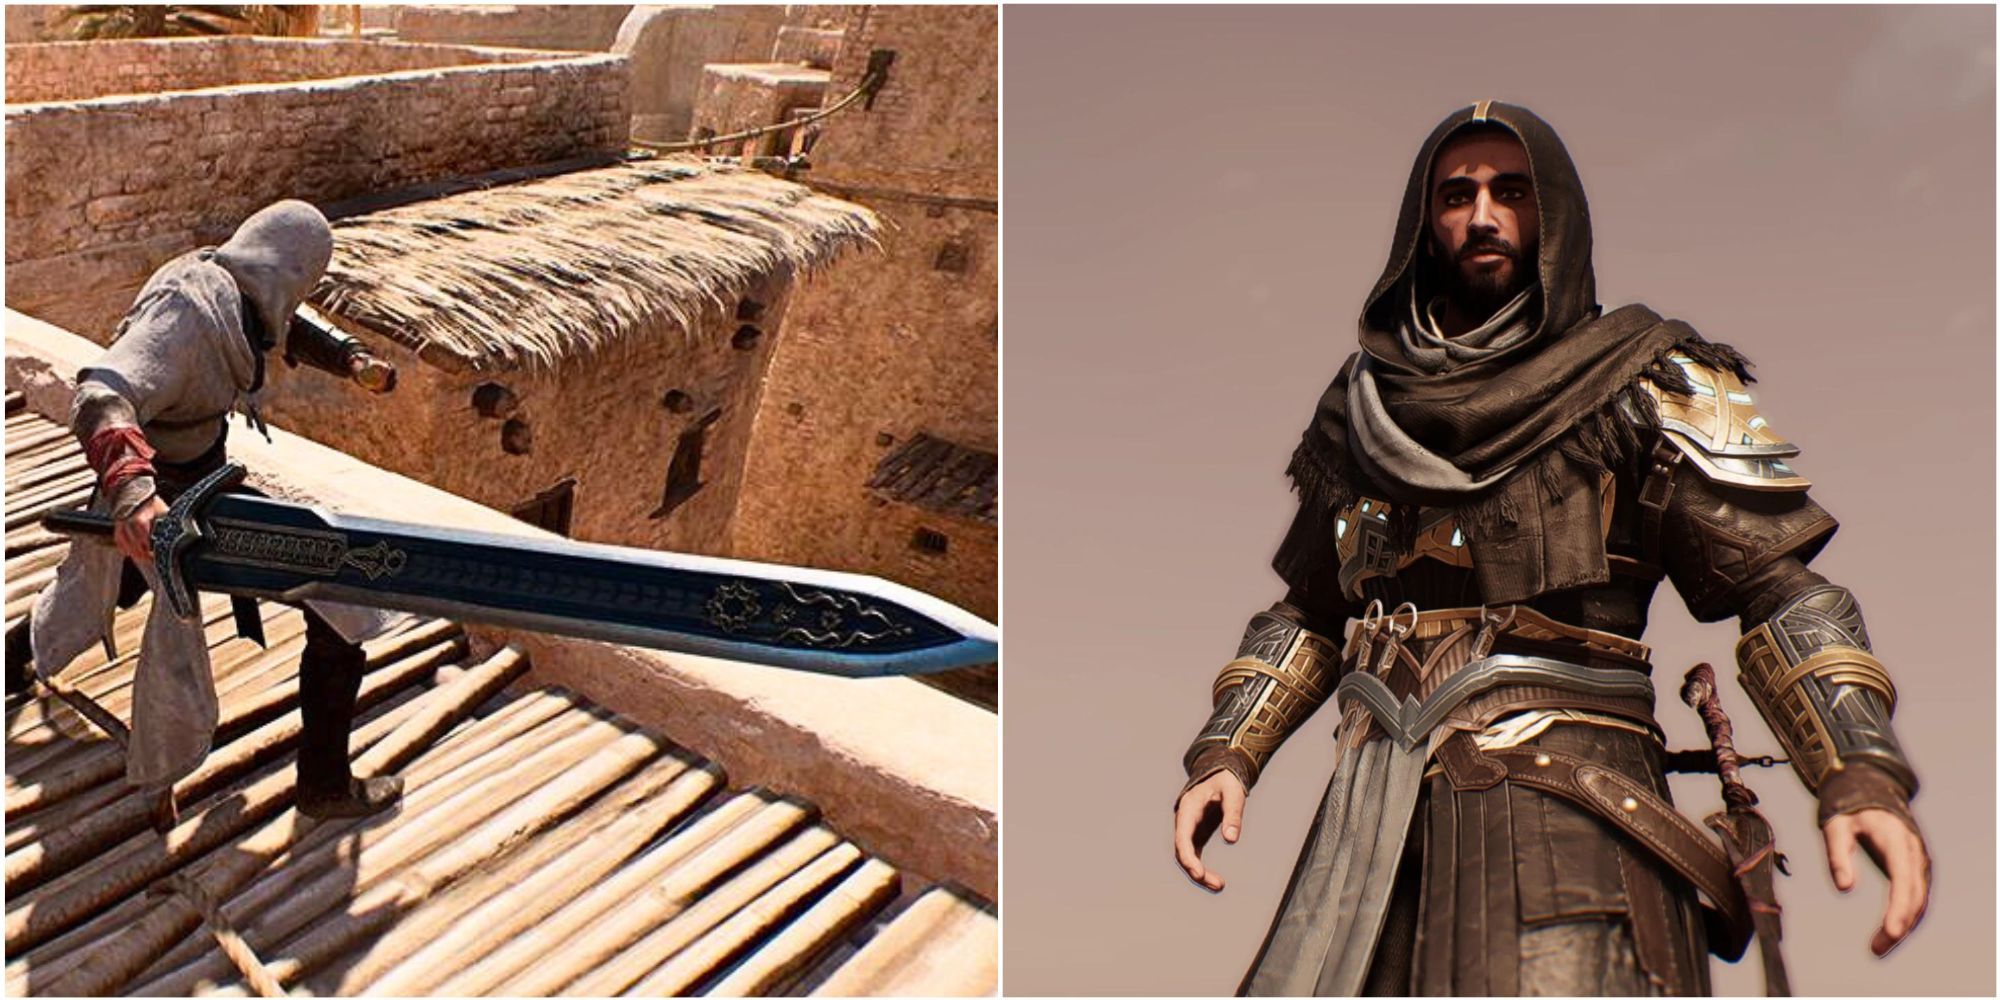 Assassins Creed Valhalla - New Stealth System, PC Mods & More! 